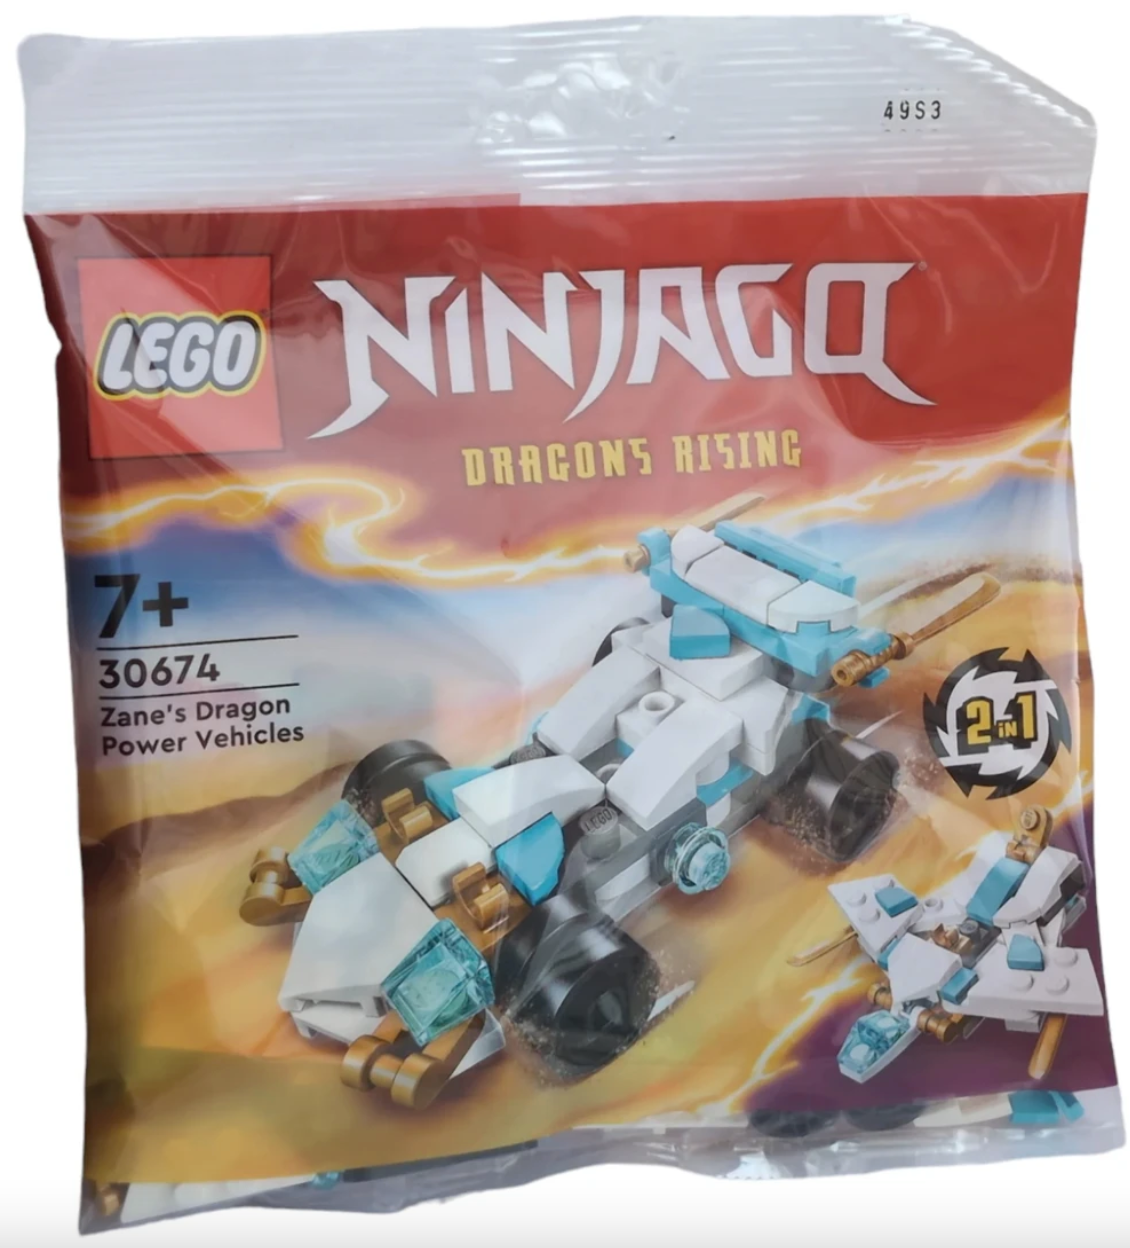 30674 Zane's Dragon Power Vehicles (IN-STORE PICKUP ONLY)